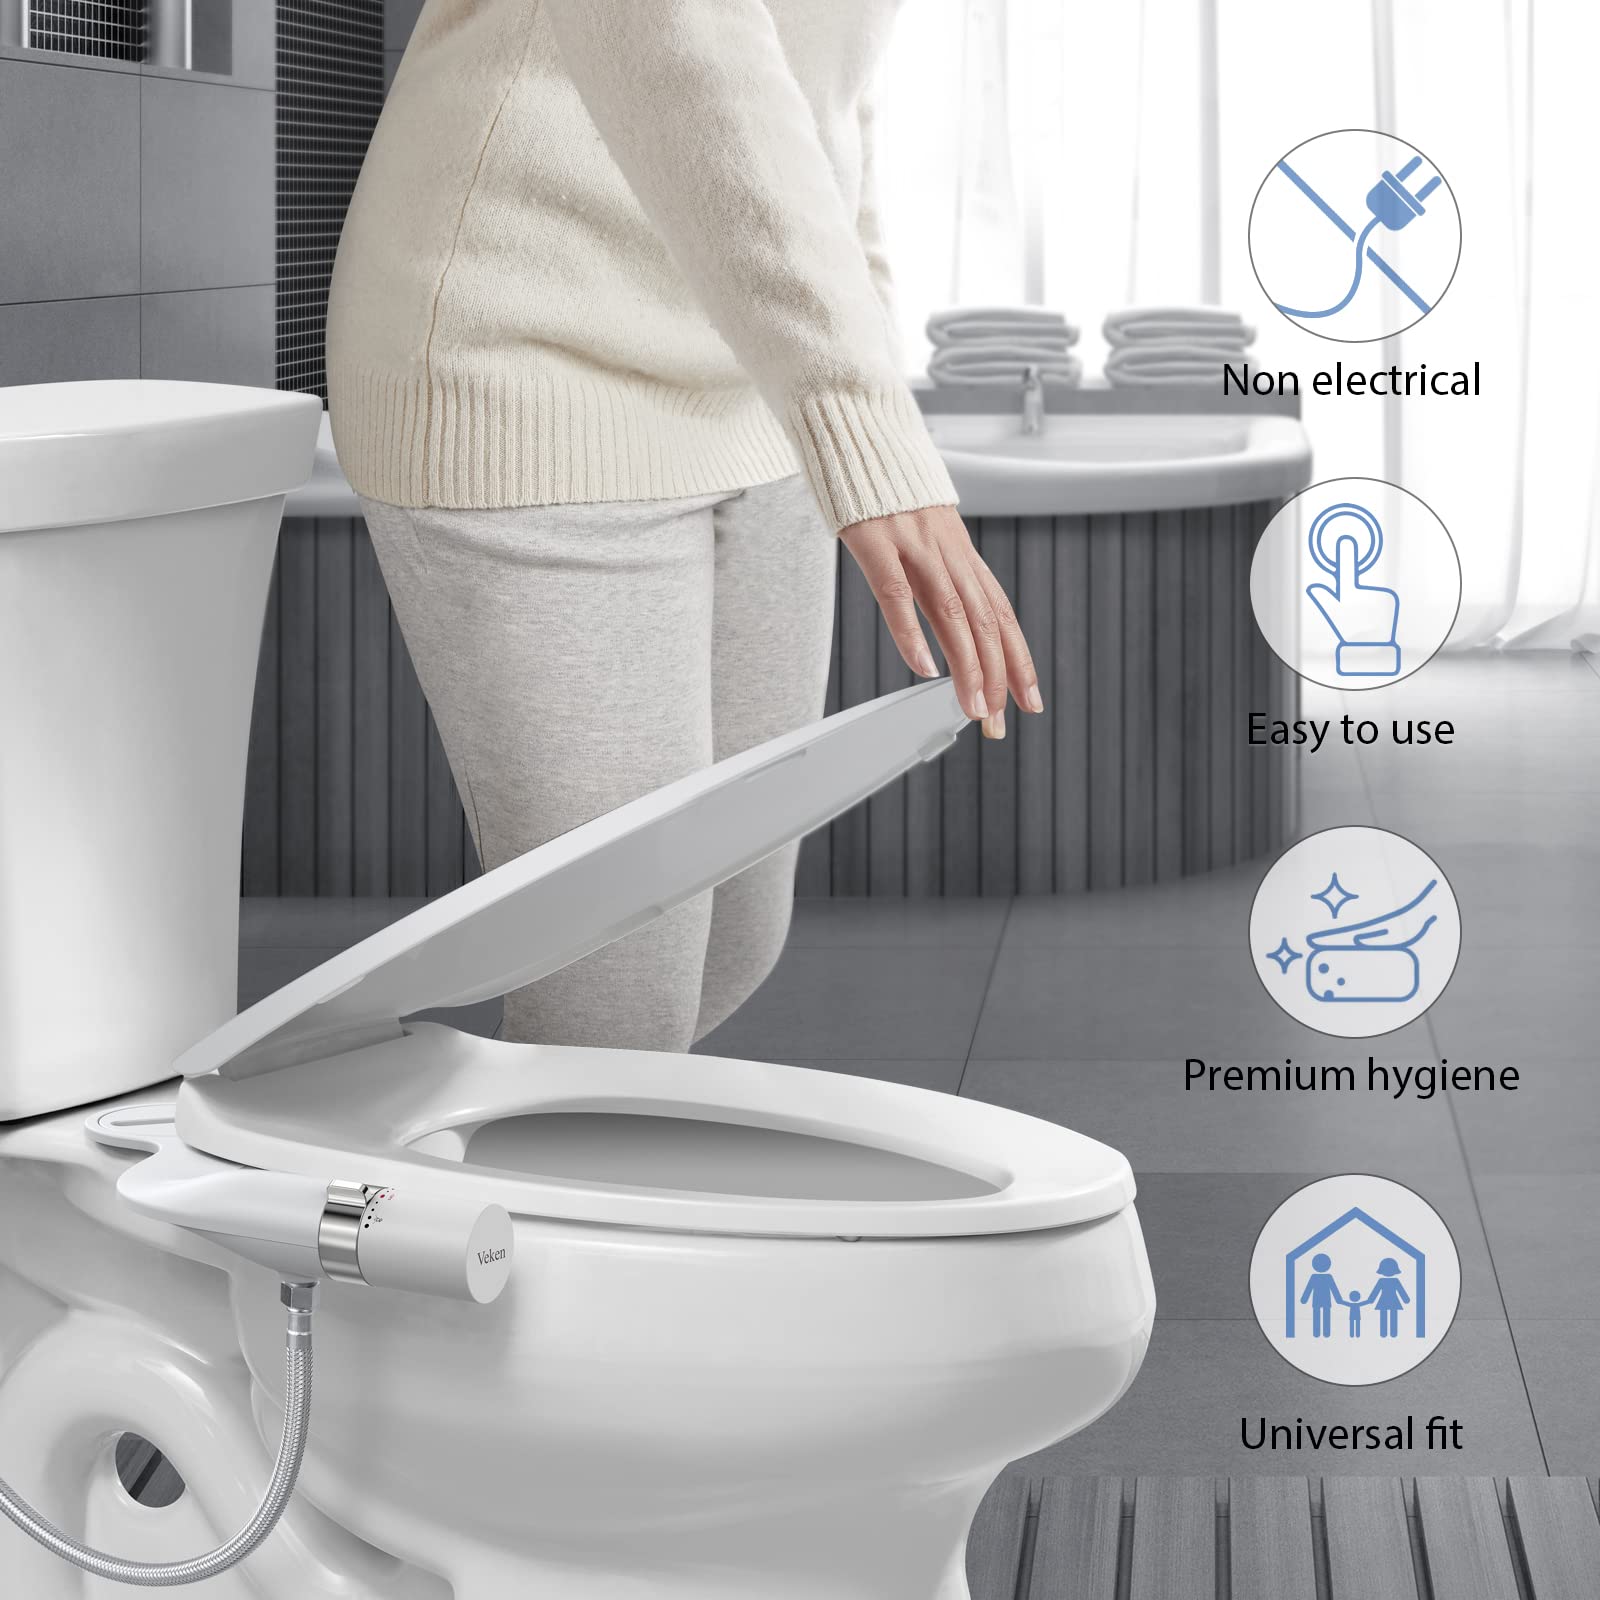 Veken Ultra-Slim Bidet Attachment for Toilet Dual Nozzle (Feminine/Posterior Wash) Hygienic Bidets for Existing Toilets, Adjustable Water Pressure Cold Water Sprayer Baday with Stainless Steel Inlet